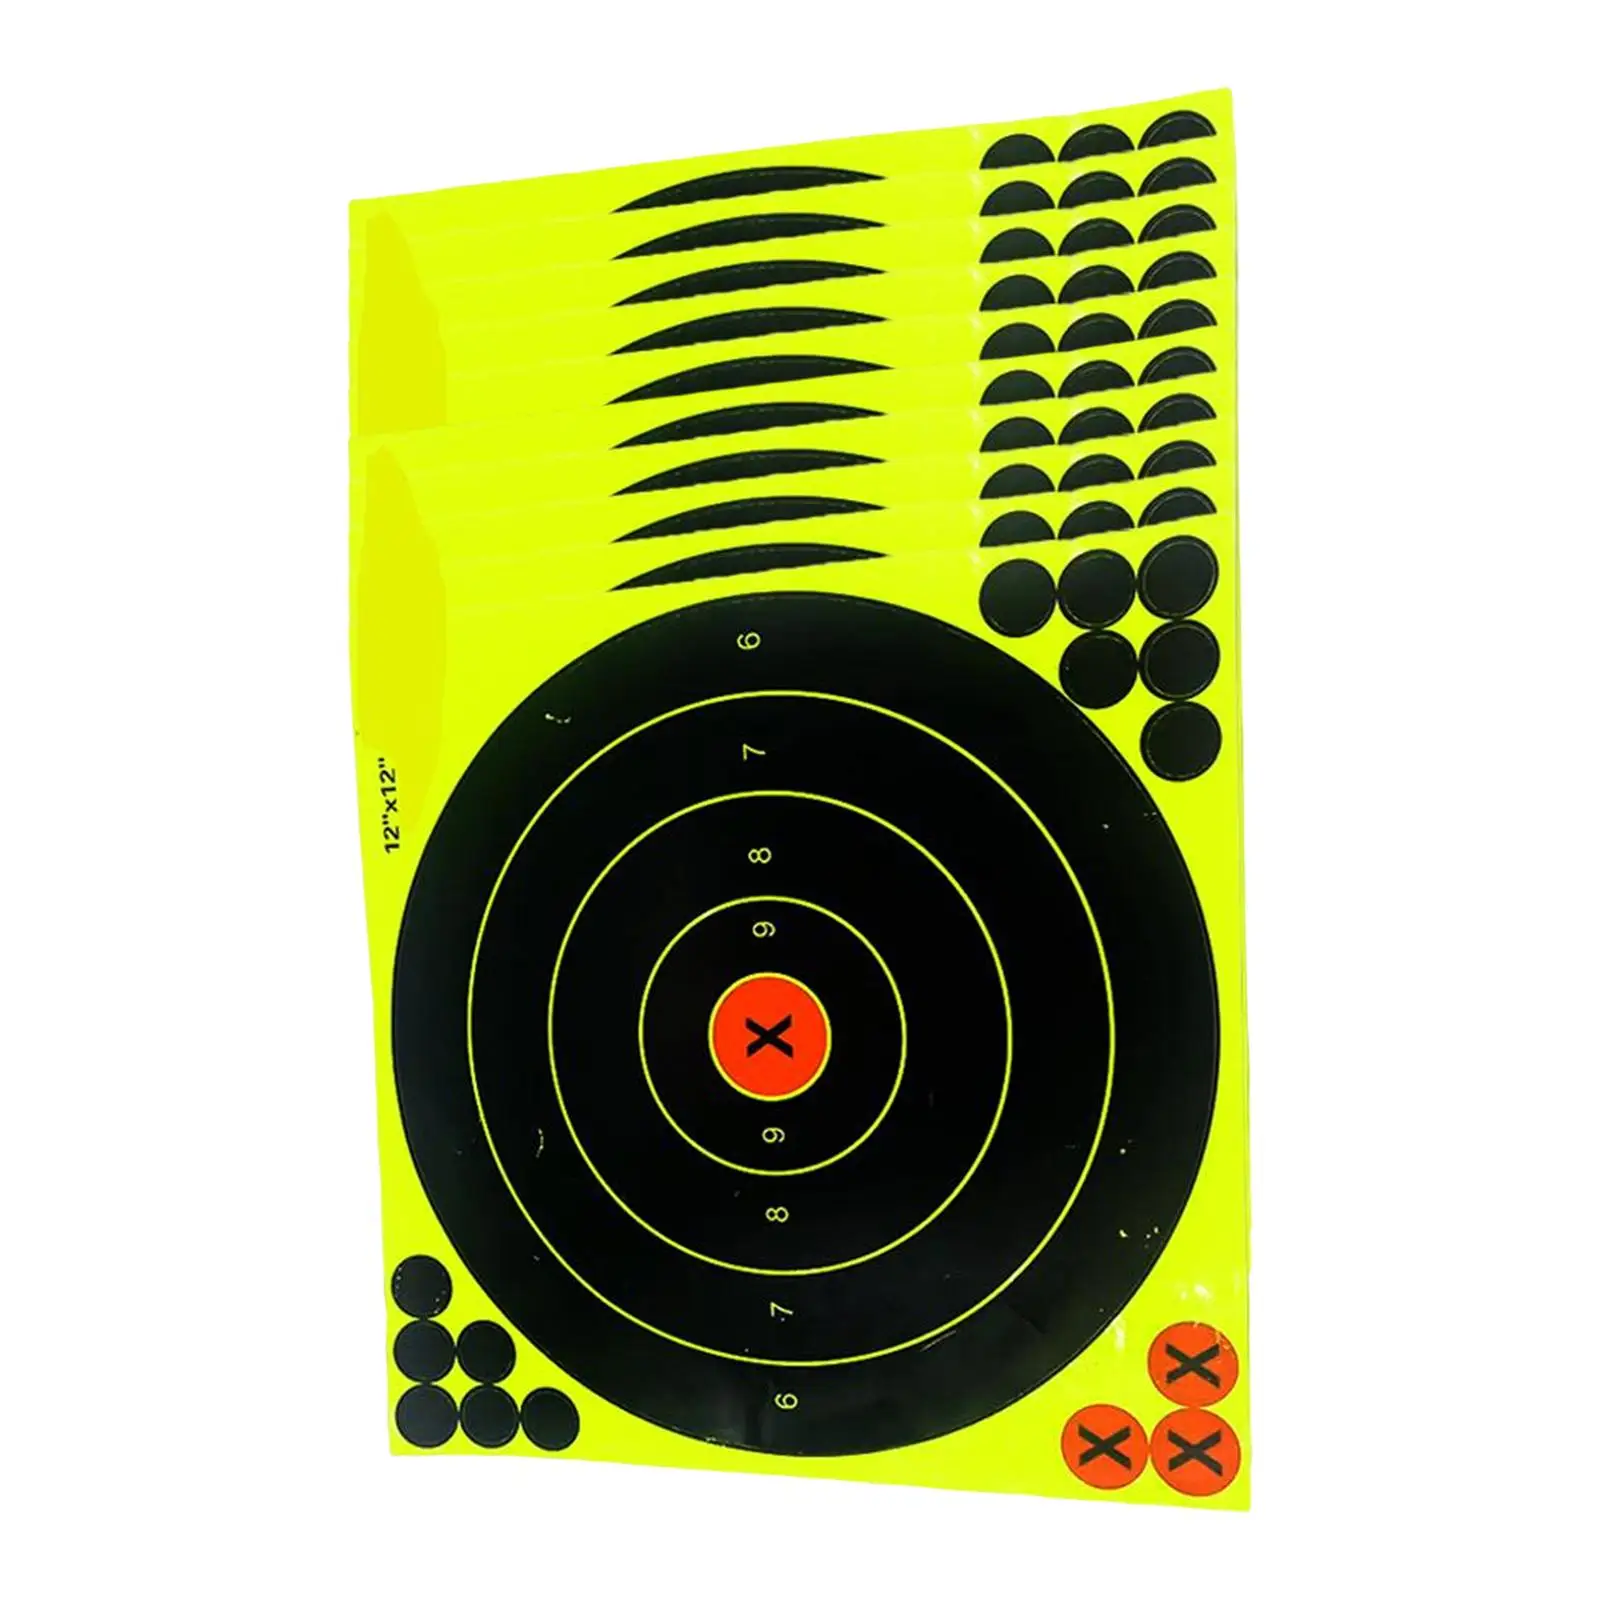 10Pcs Square Shooting Targets Splatter Reactive Paper Sticker Adhesive High Visibility Paper Target for Practice Accessories Bow